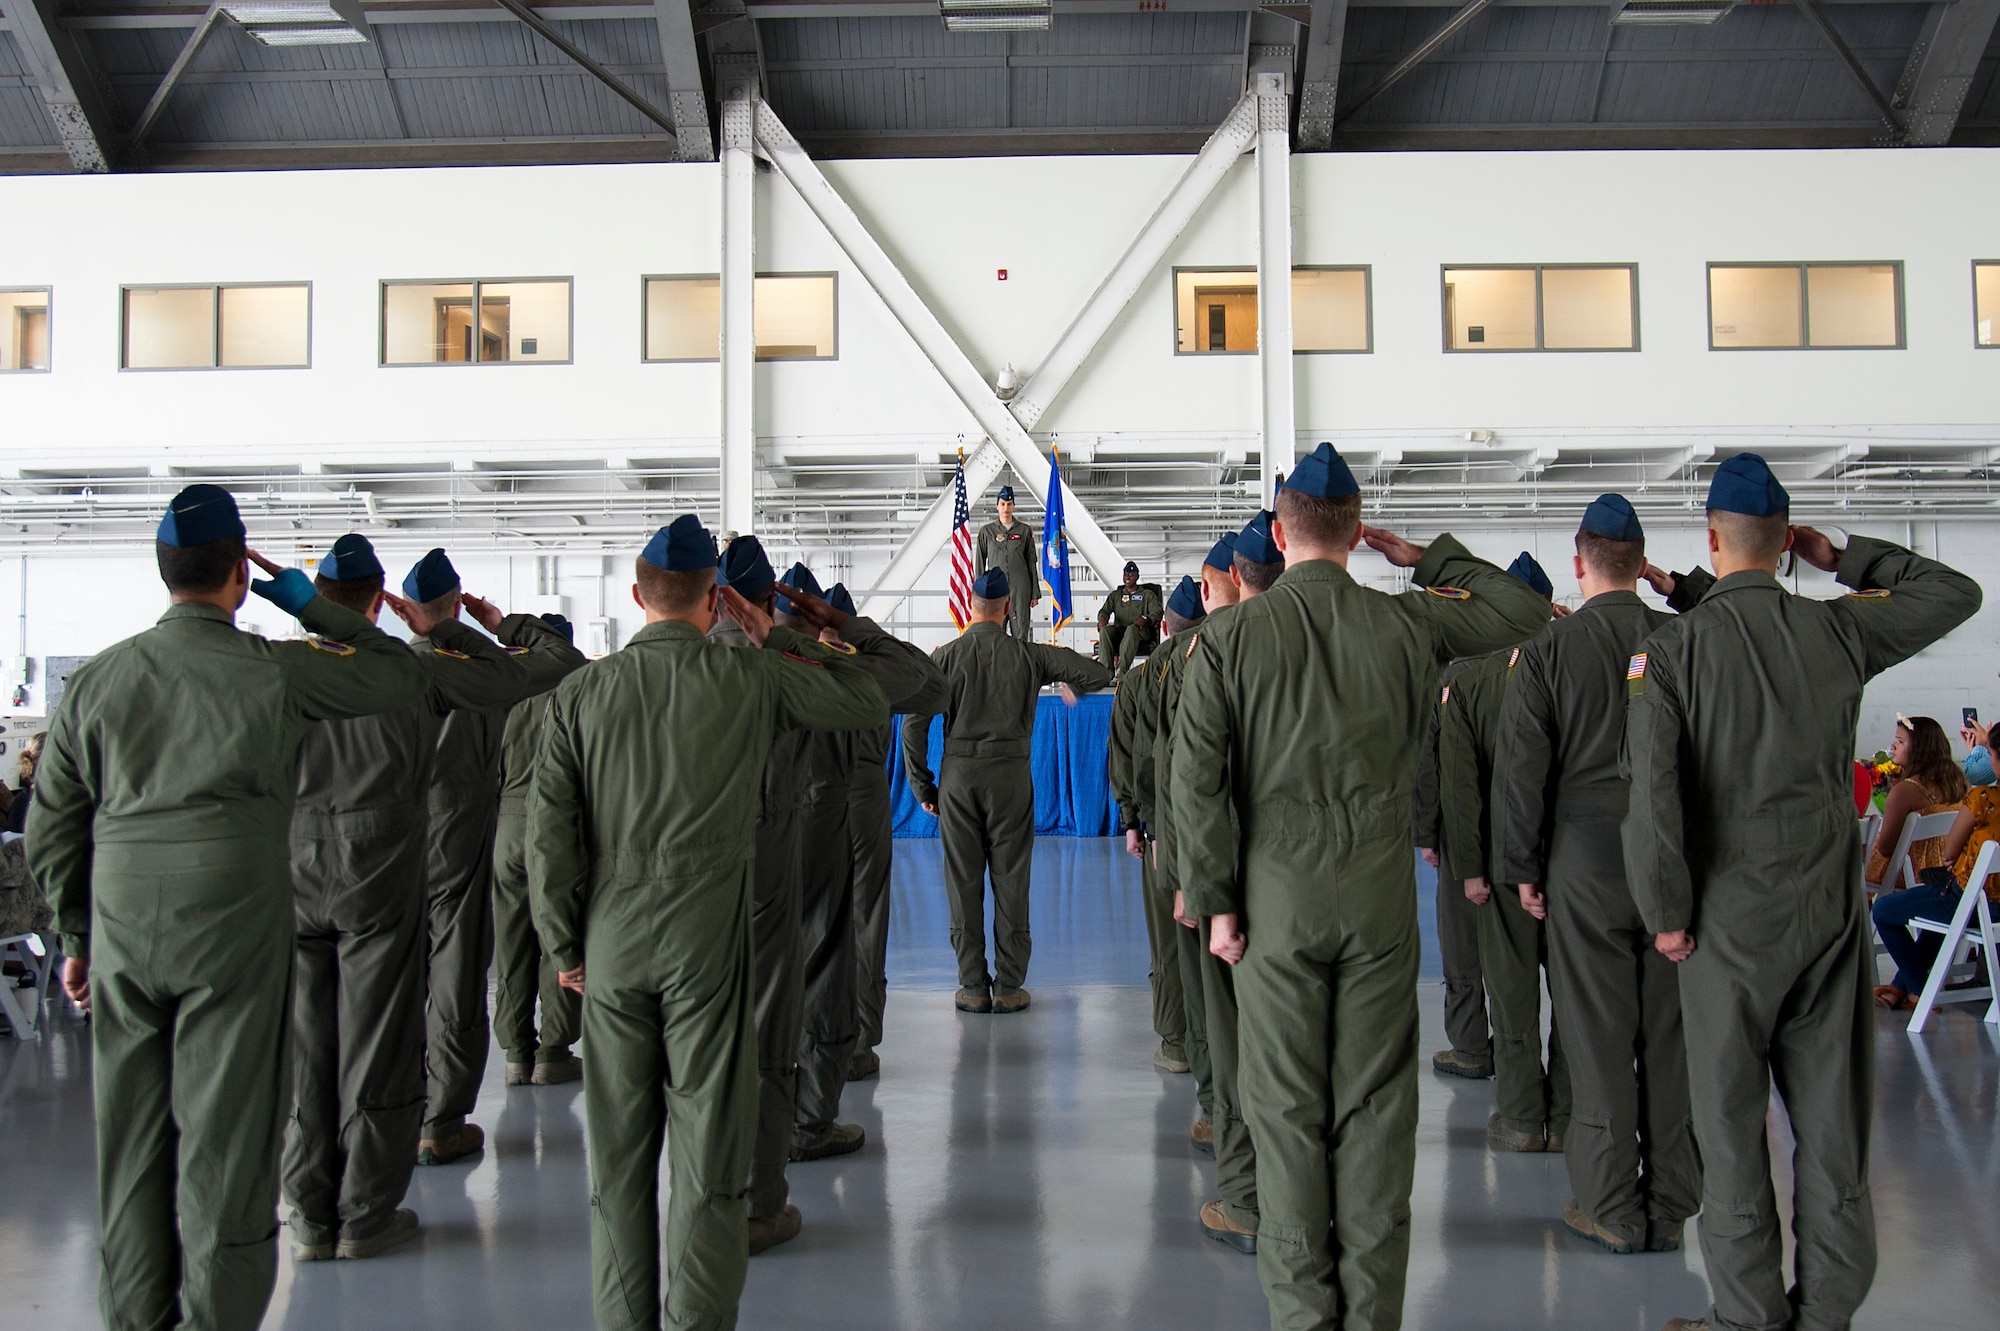 Members of the 50th Air Refueling Squadron (ARS) render their first salute to U.S. Air Force Lt. Col. Menola Guthrie, the 50th ARS commander, during a change of command ceremony, Aug. 2, 2019, at MacDill Air Force Base, Fla.  Prior to assuming command of the 50th ARS, Guthrie served as the 6th Air Mobility Wing Inspector General. (U.S. Air Force photo by Airman 1st Class Shannon Bowman)